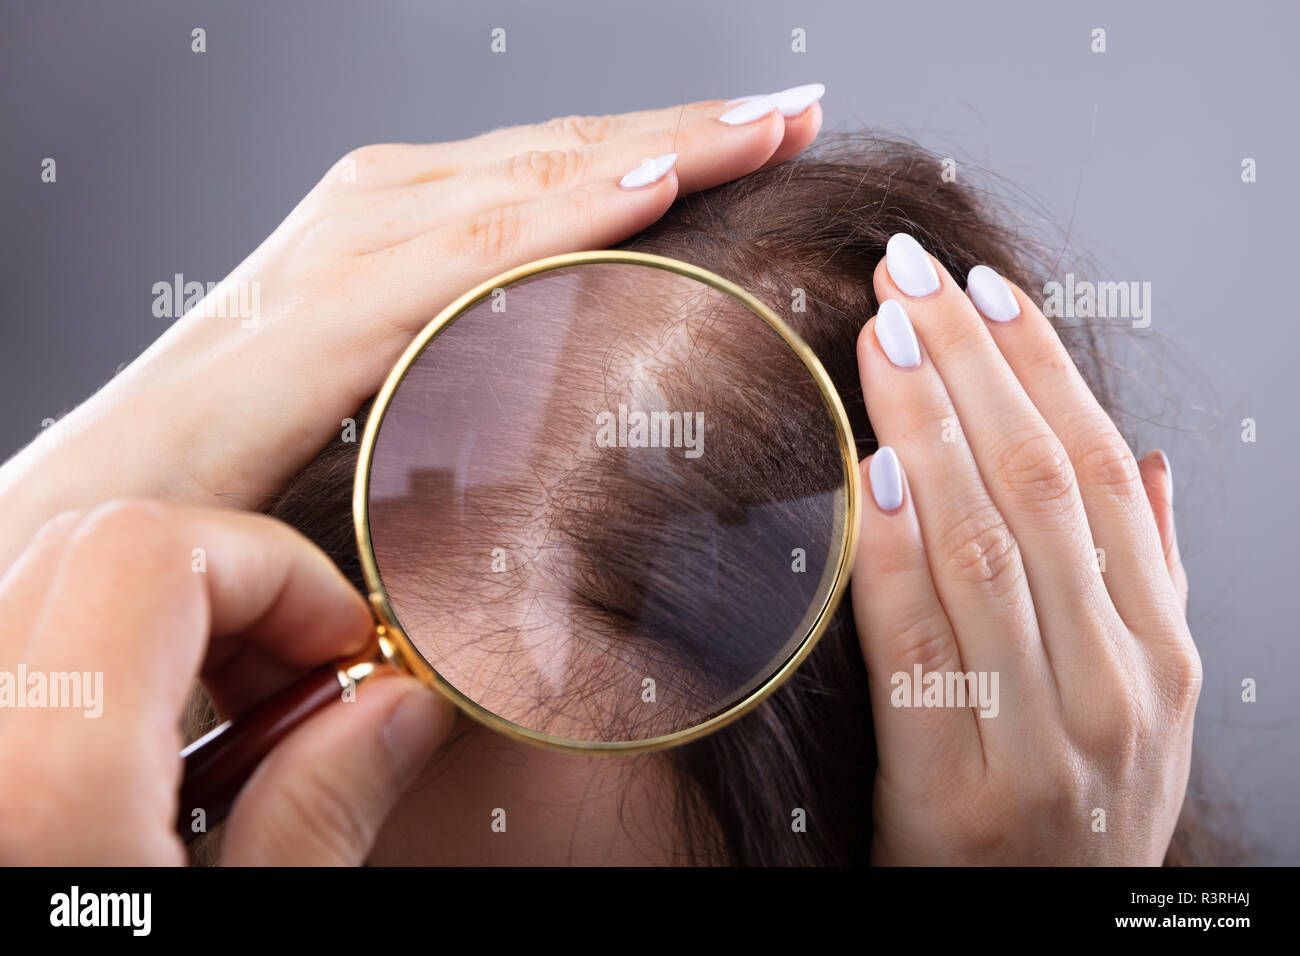 Dermatologist's Hand Examining Woman's Hair With Magnifying Glass Stock Photo